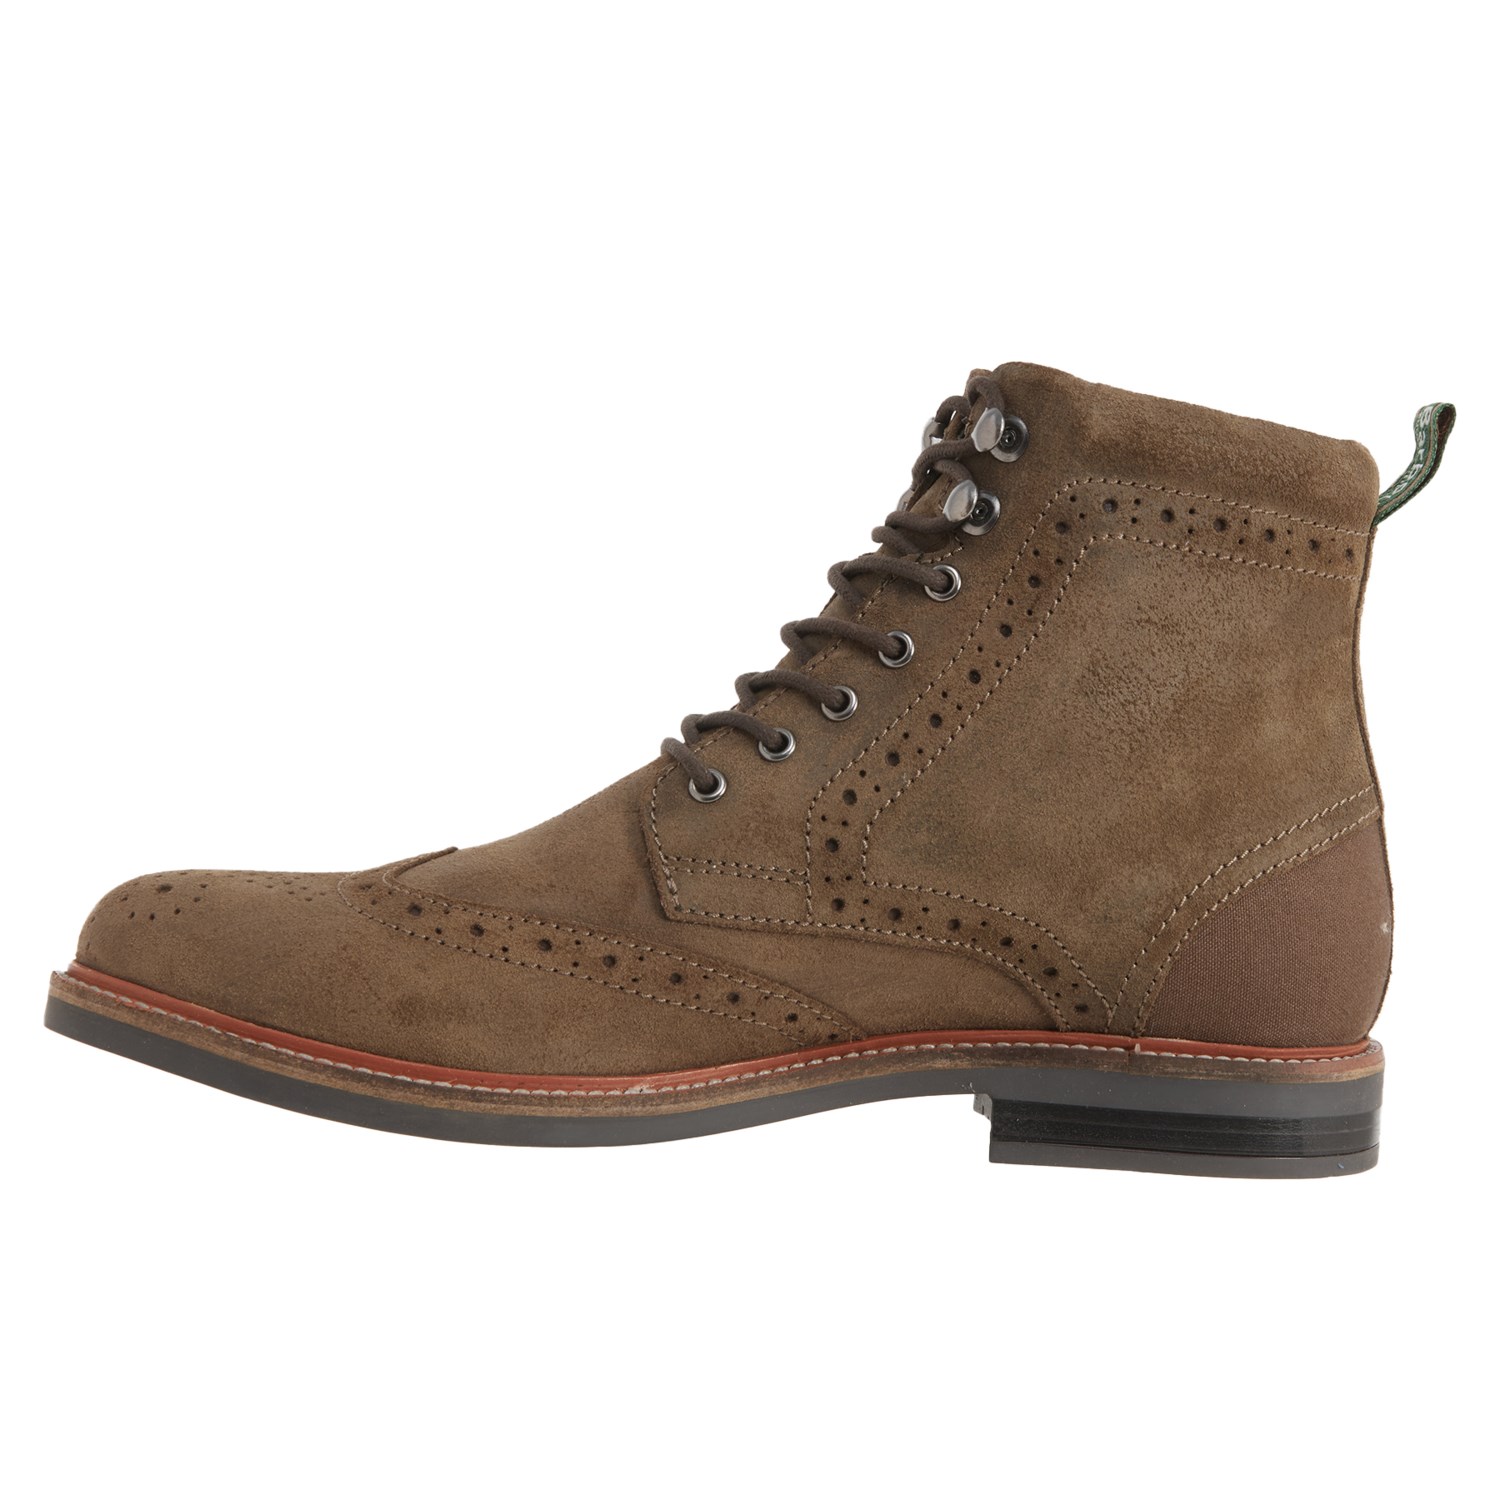 Barbour Seaton Boots (For Men) - Save 47%